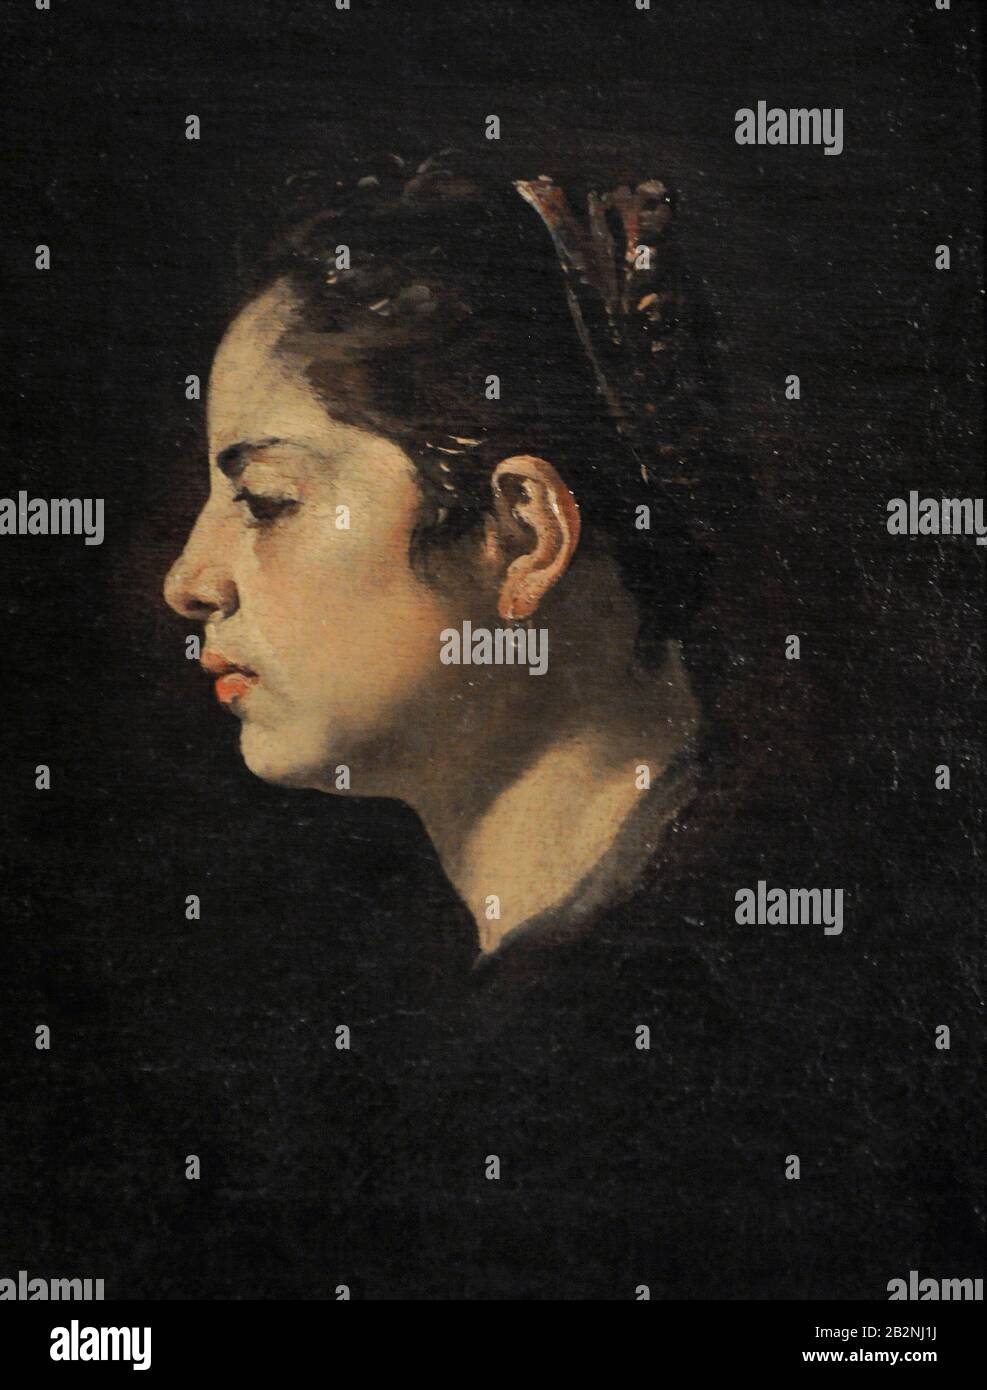 Painting attributed to Diego Rodriguez de Silva y Velazquez (1599-1660). Spanish Baroque painter. Head of a Young Woman, ca.1624. Lazaro Galdiano Museum. Madrid. Spain. Stock Photo